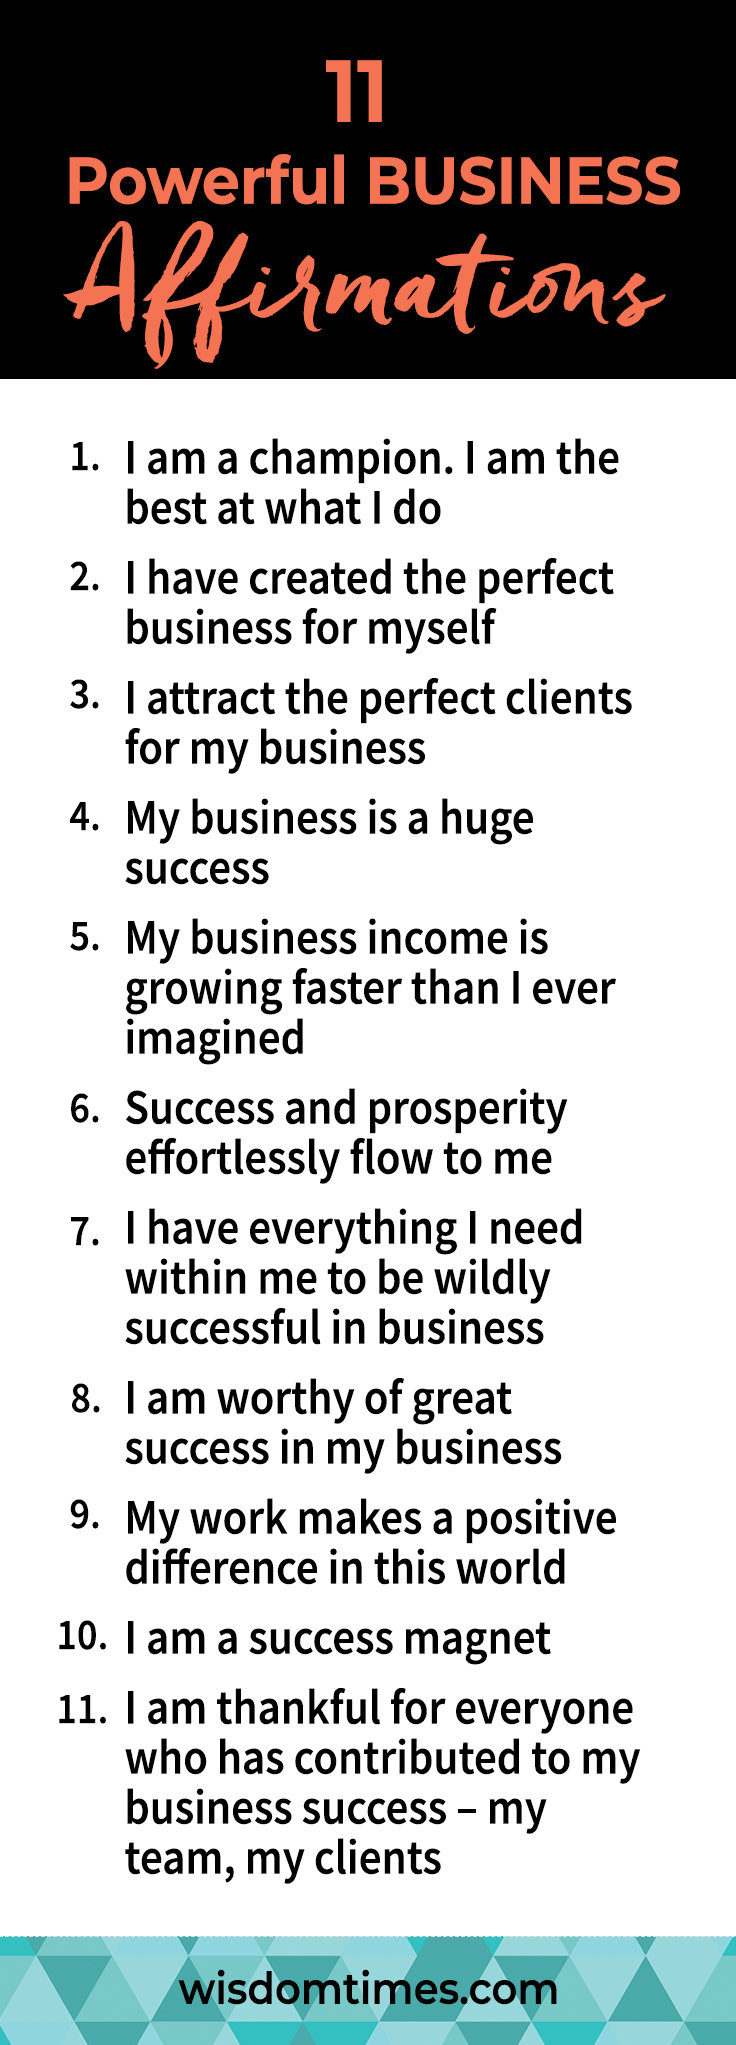 10 Powerful BUSINESS Affirmations